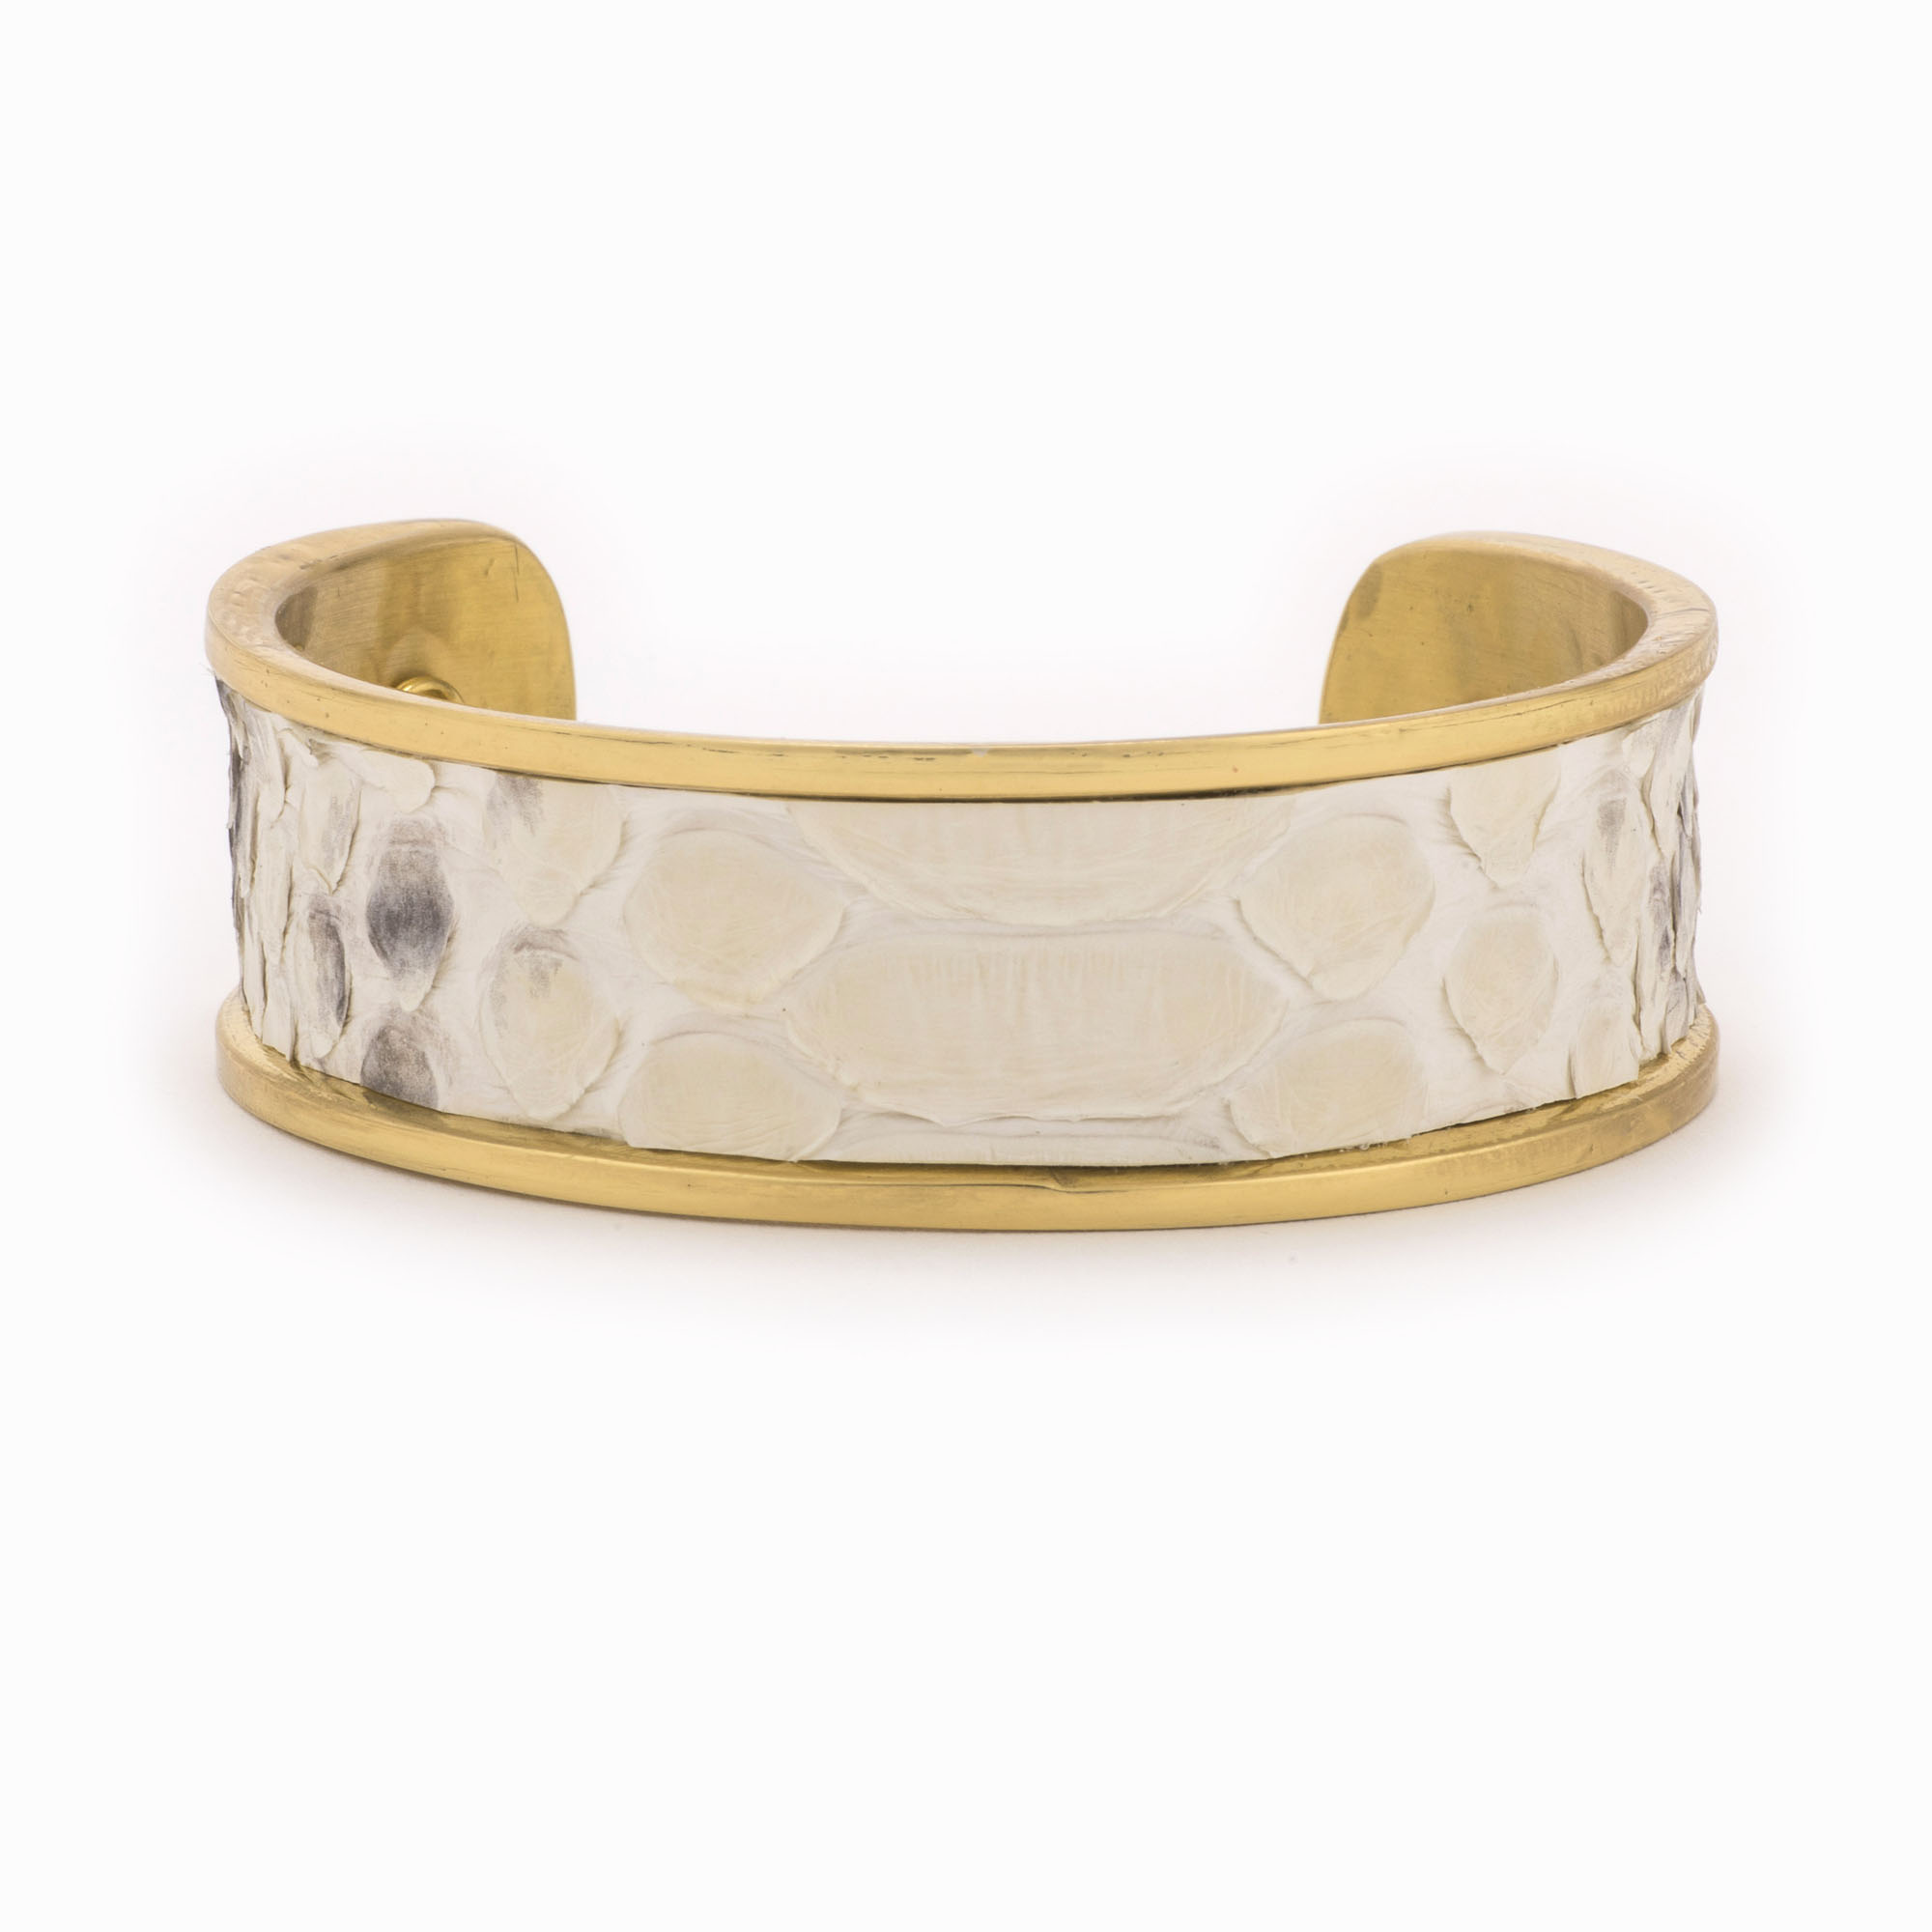 Rear view of a medium gold cuff with black and white colored snakeskin pattern inlaid.